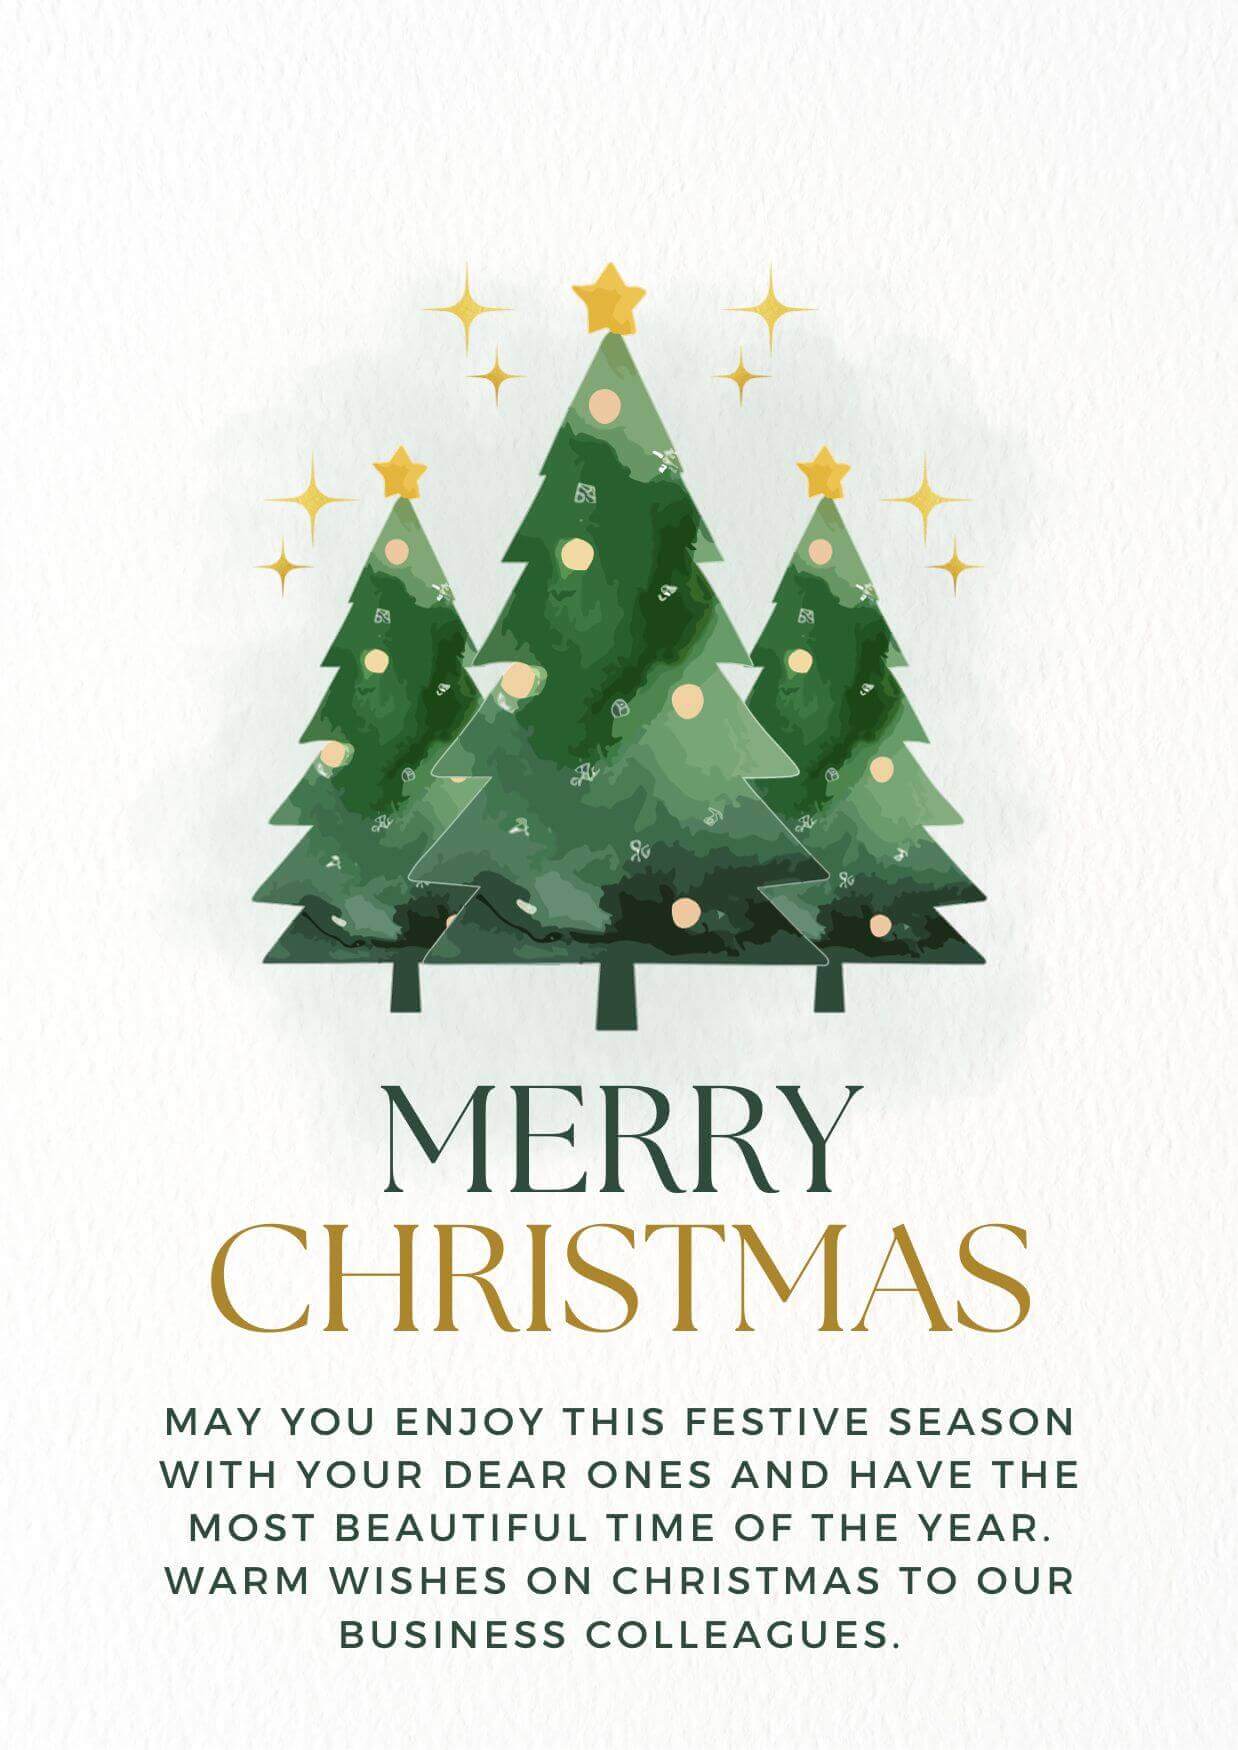 Merry Christmas Message For Business Partners